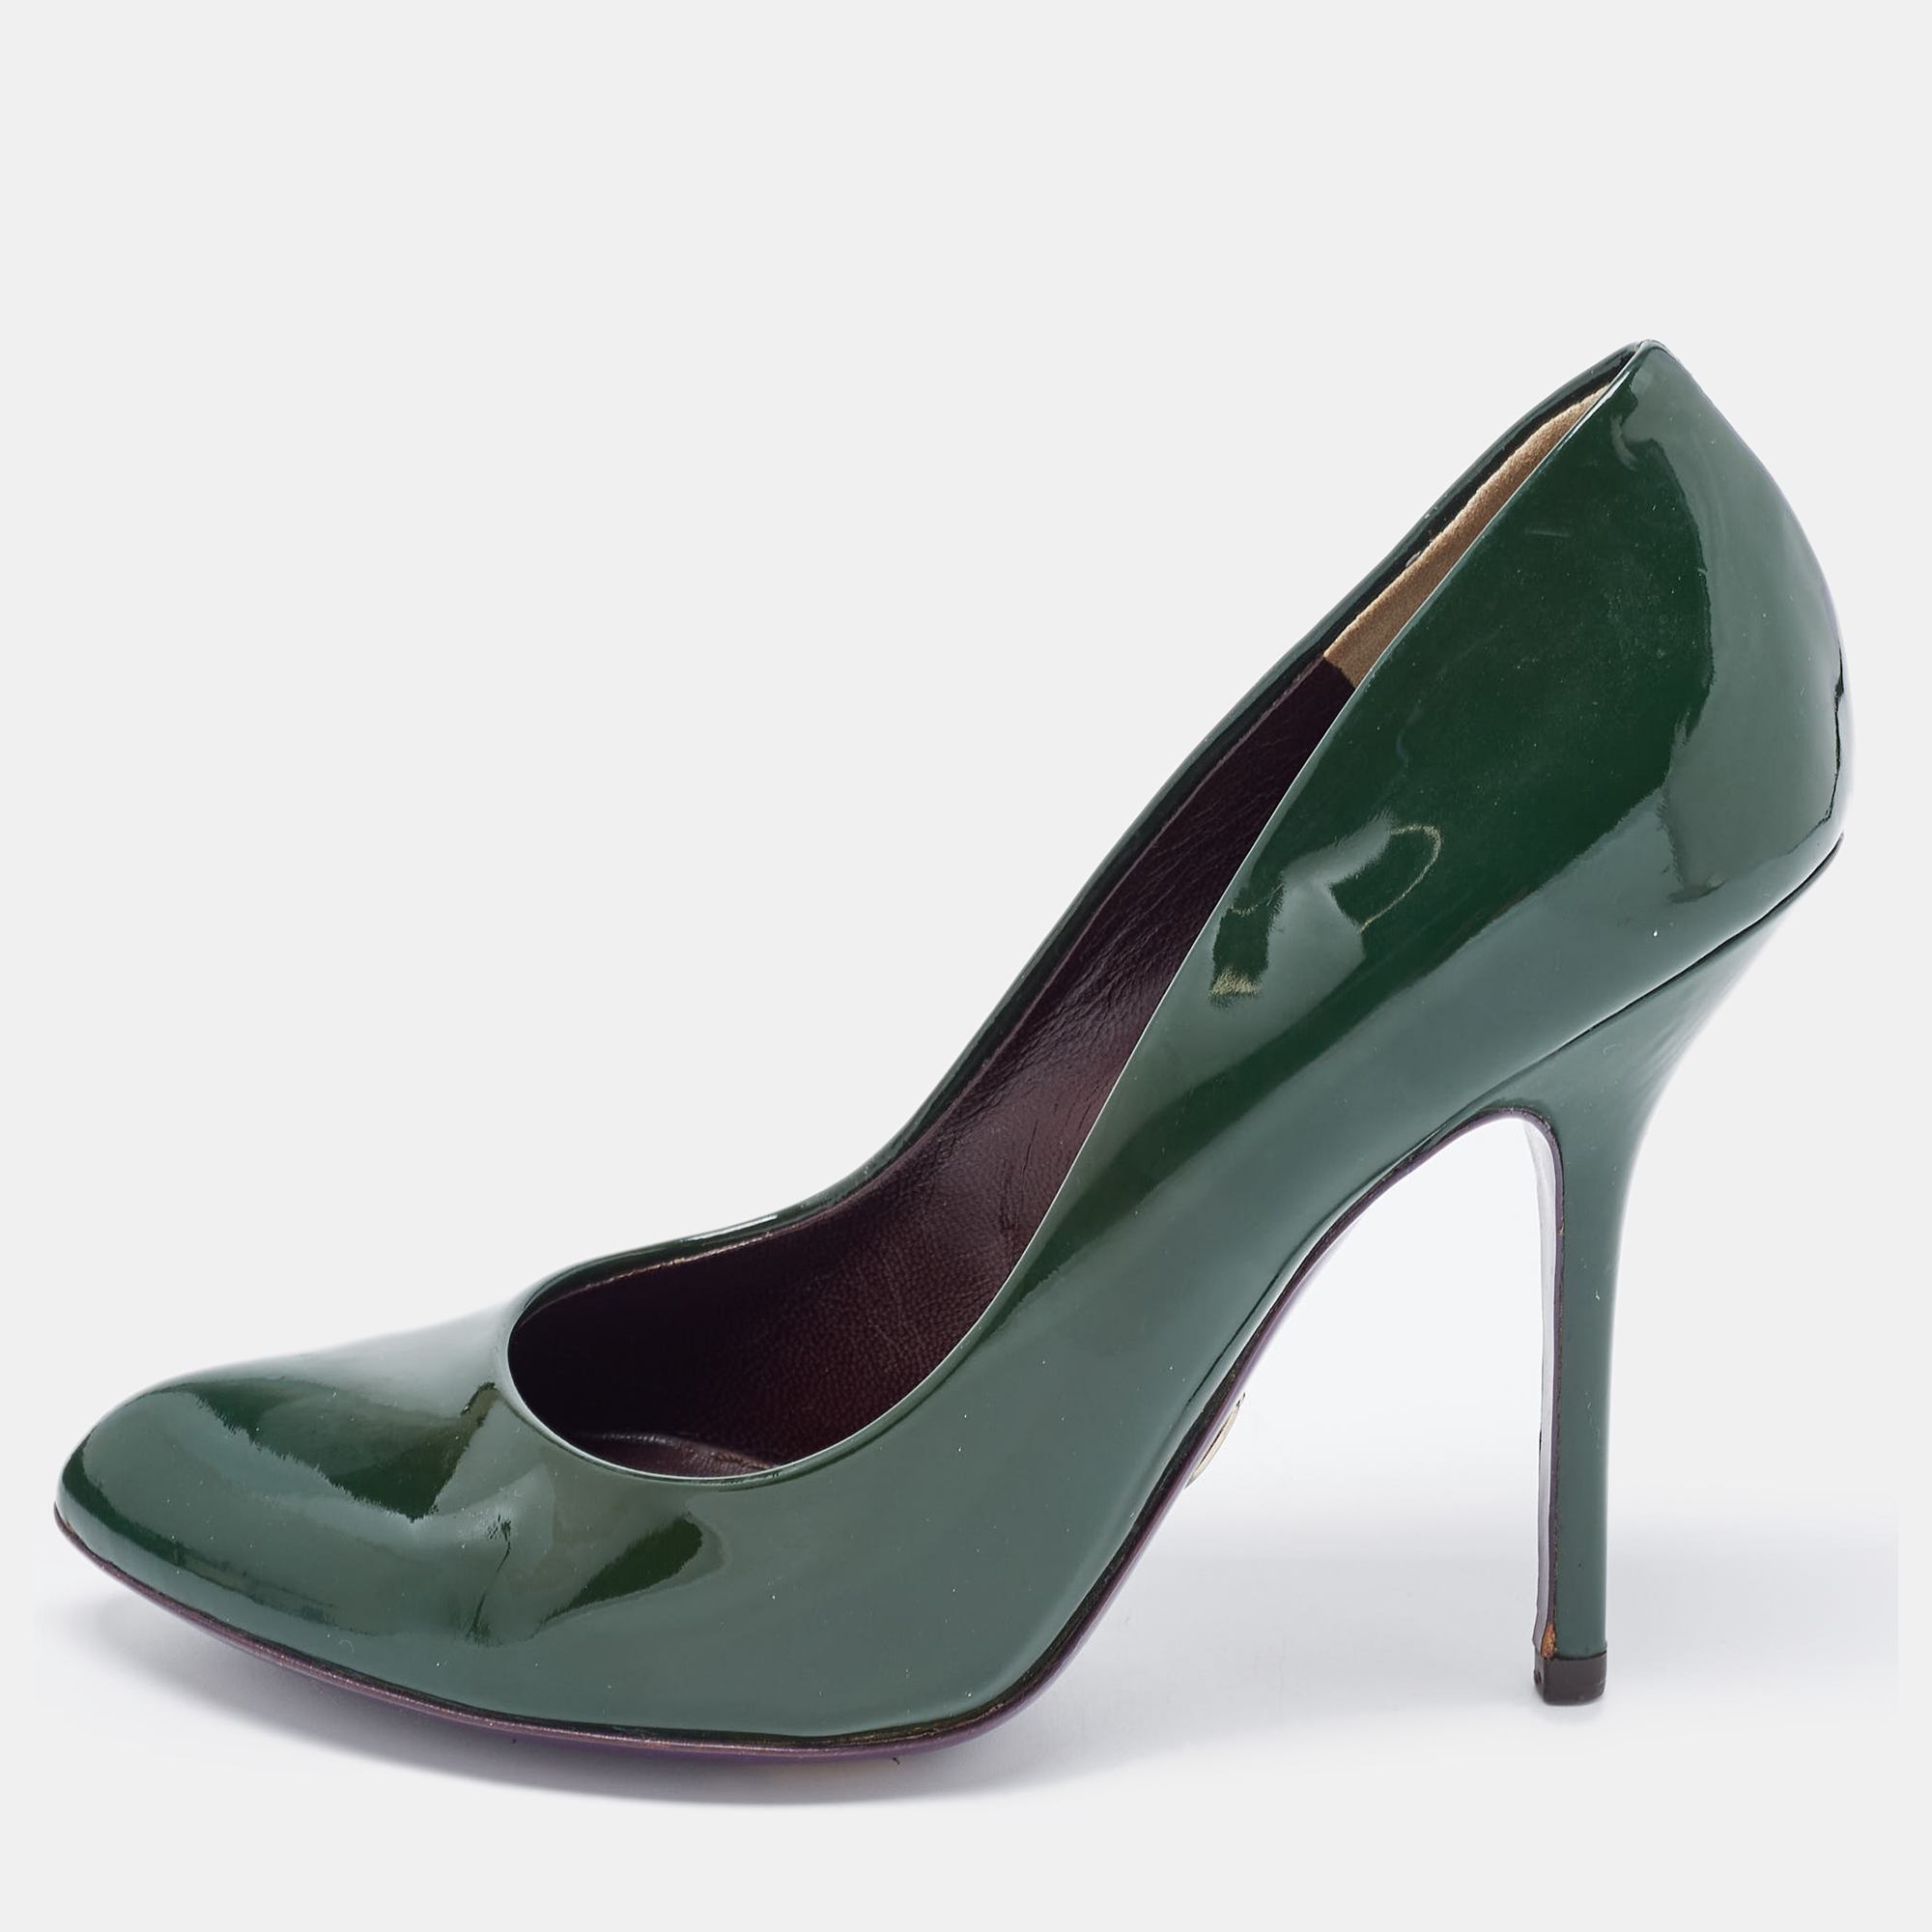 Pre-owned Dolce & Gabbana Green Patent Leather Almond Toe Pumps Size 37.5